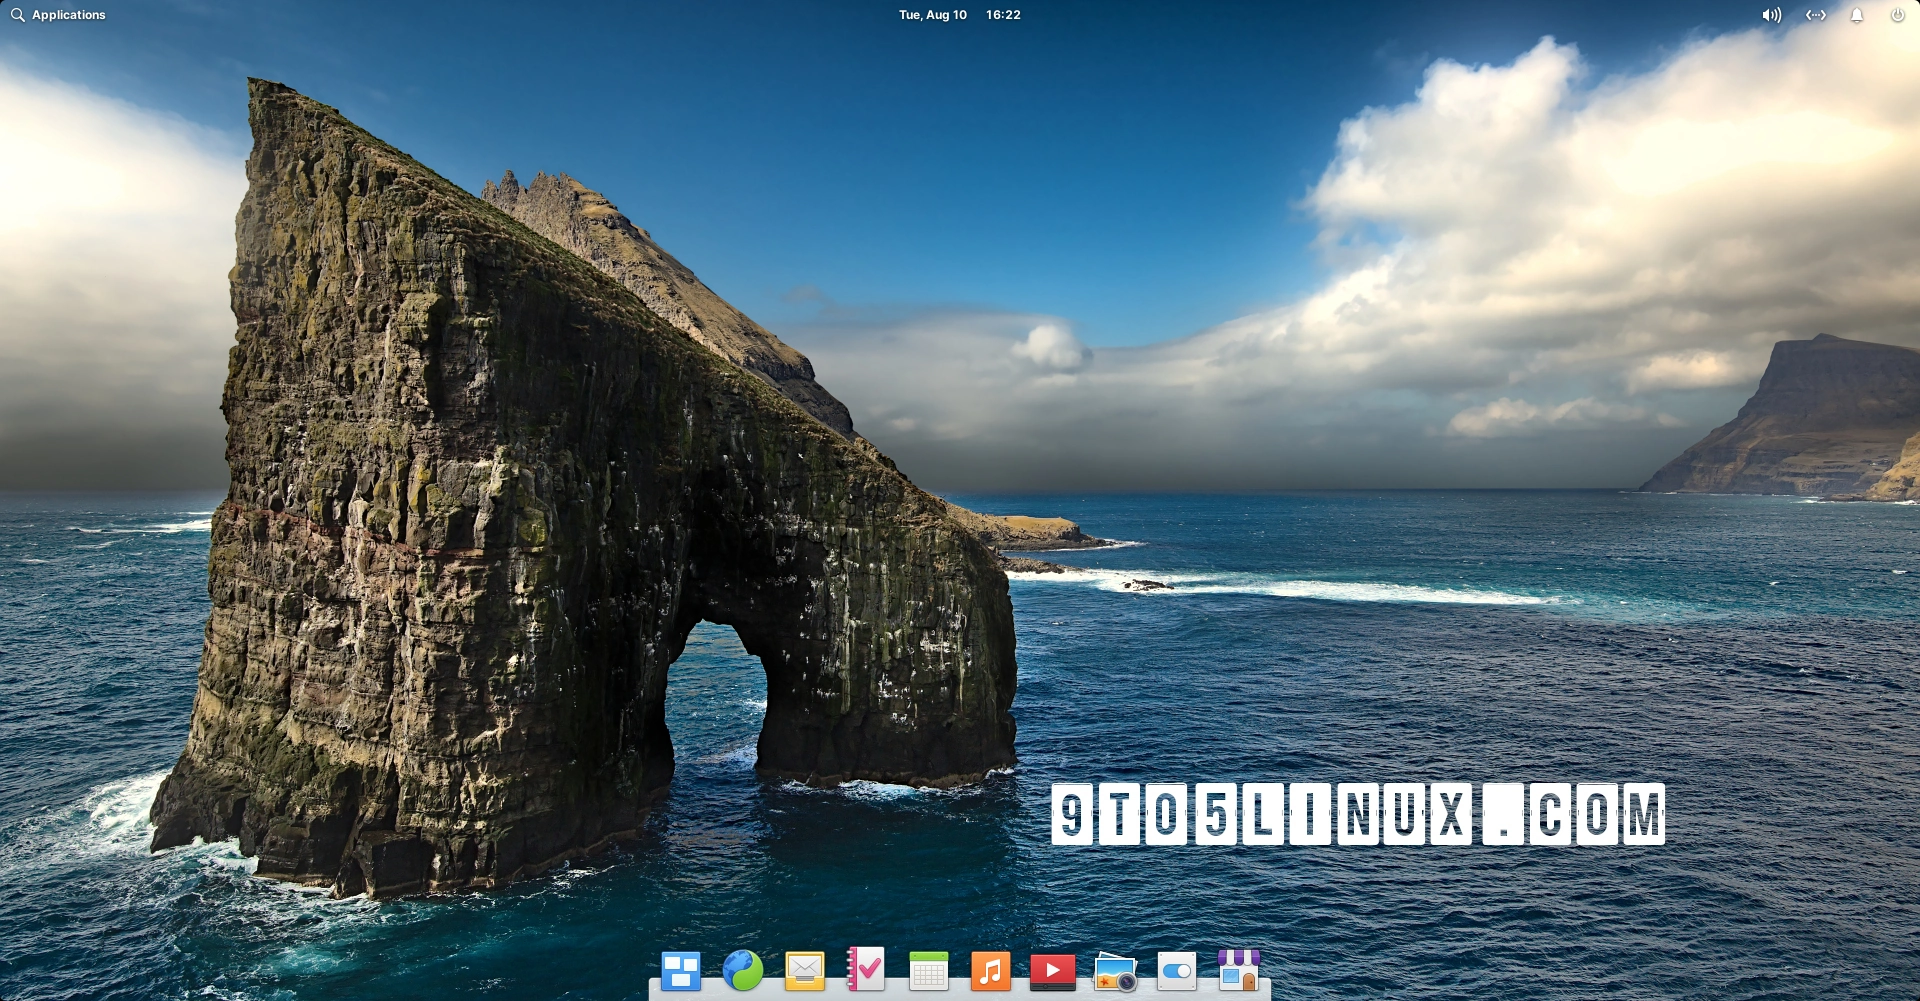 elementary OS 7 Will Be Based on Ubuntu 22.04 LTS, Offer GTK4 Apps and Power Profiles